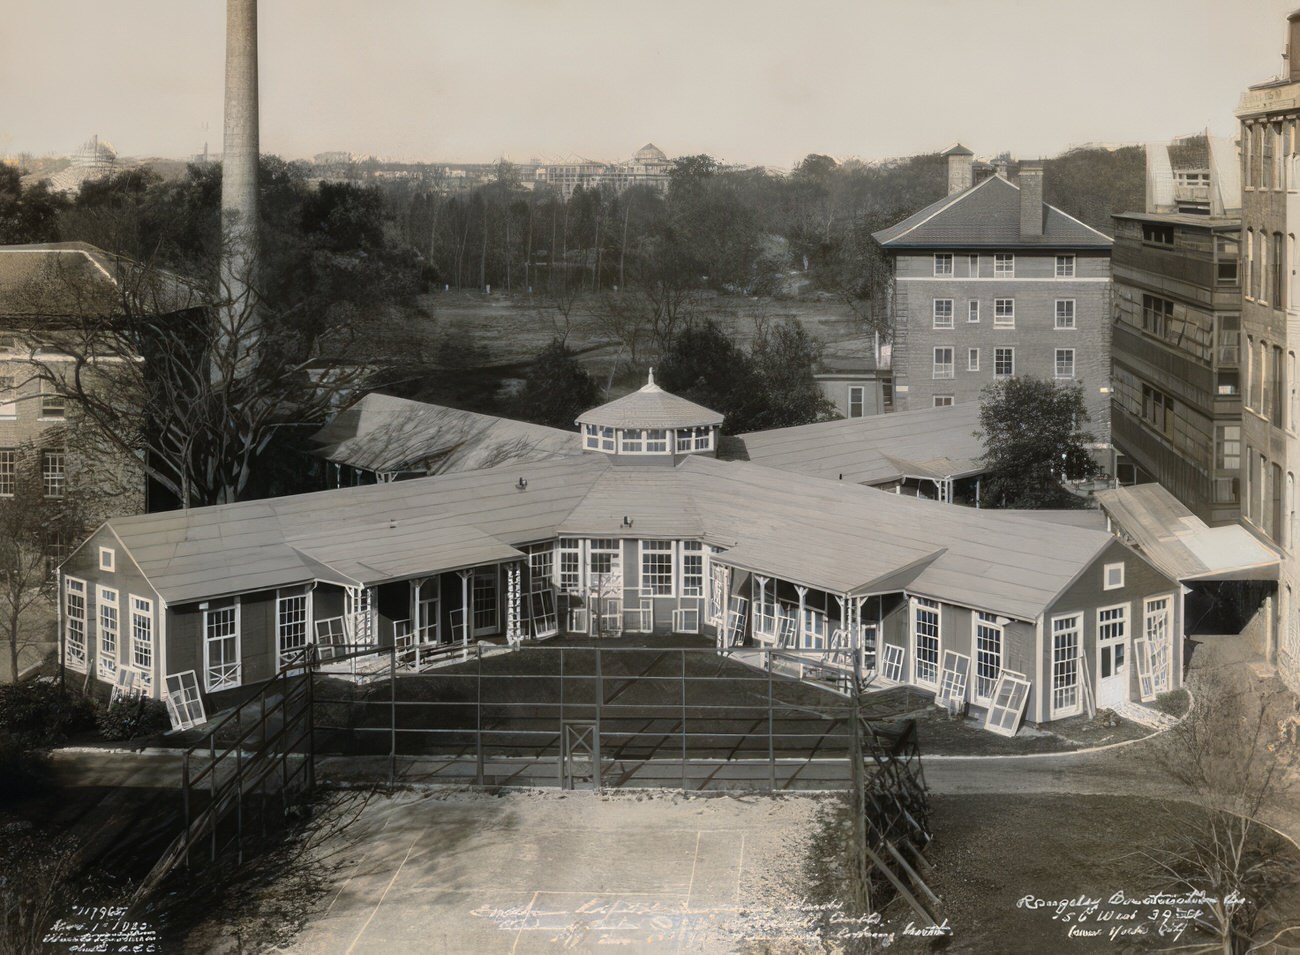 Fordham Hospital Temporary Wards From South Looking North, 1920.